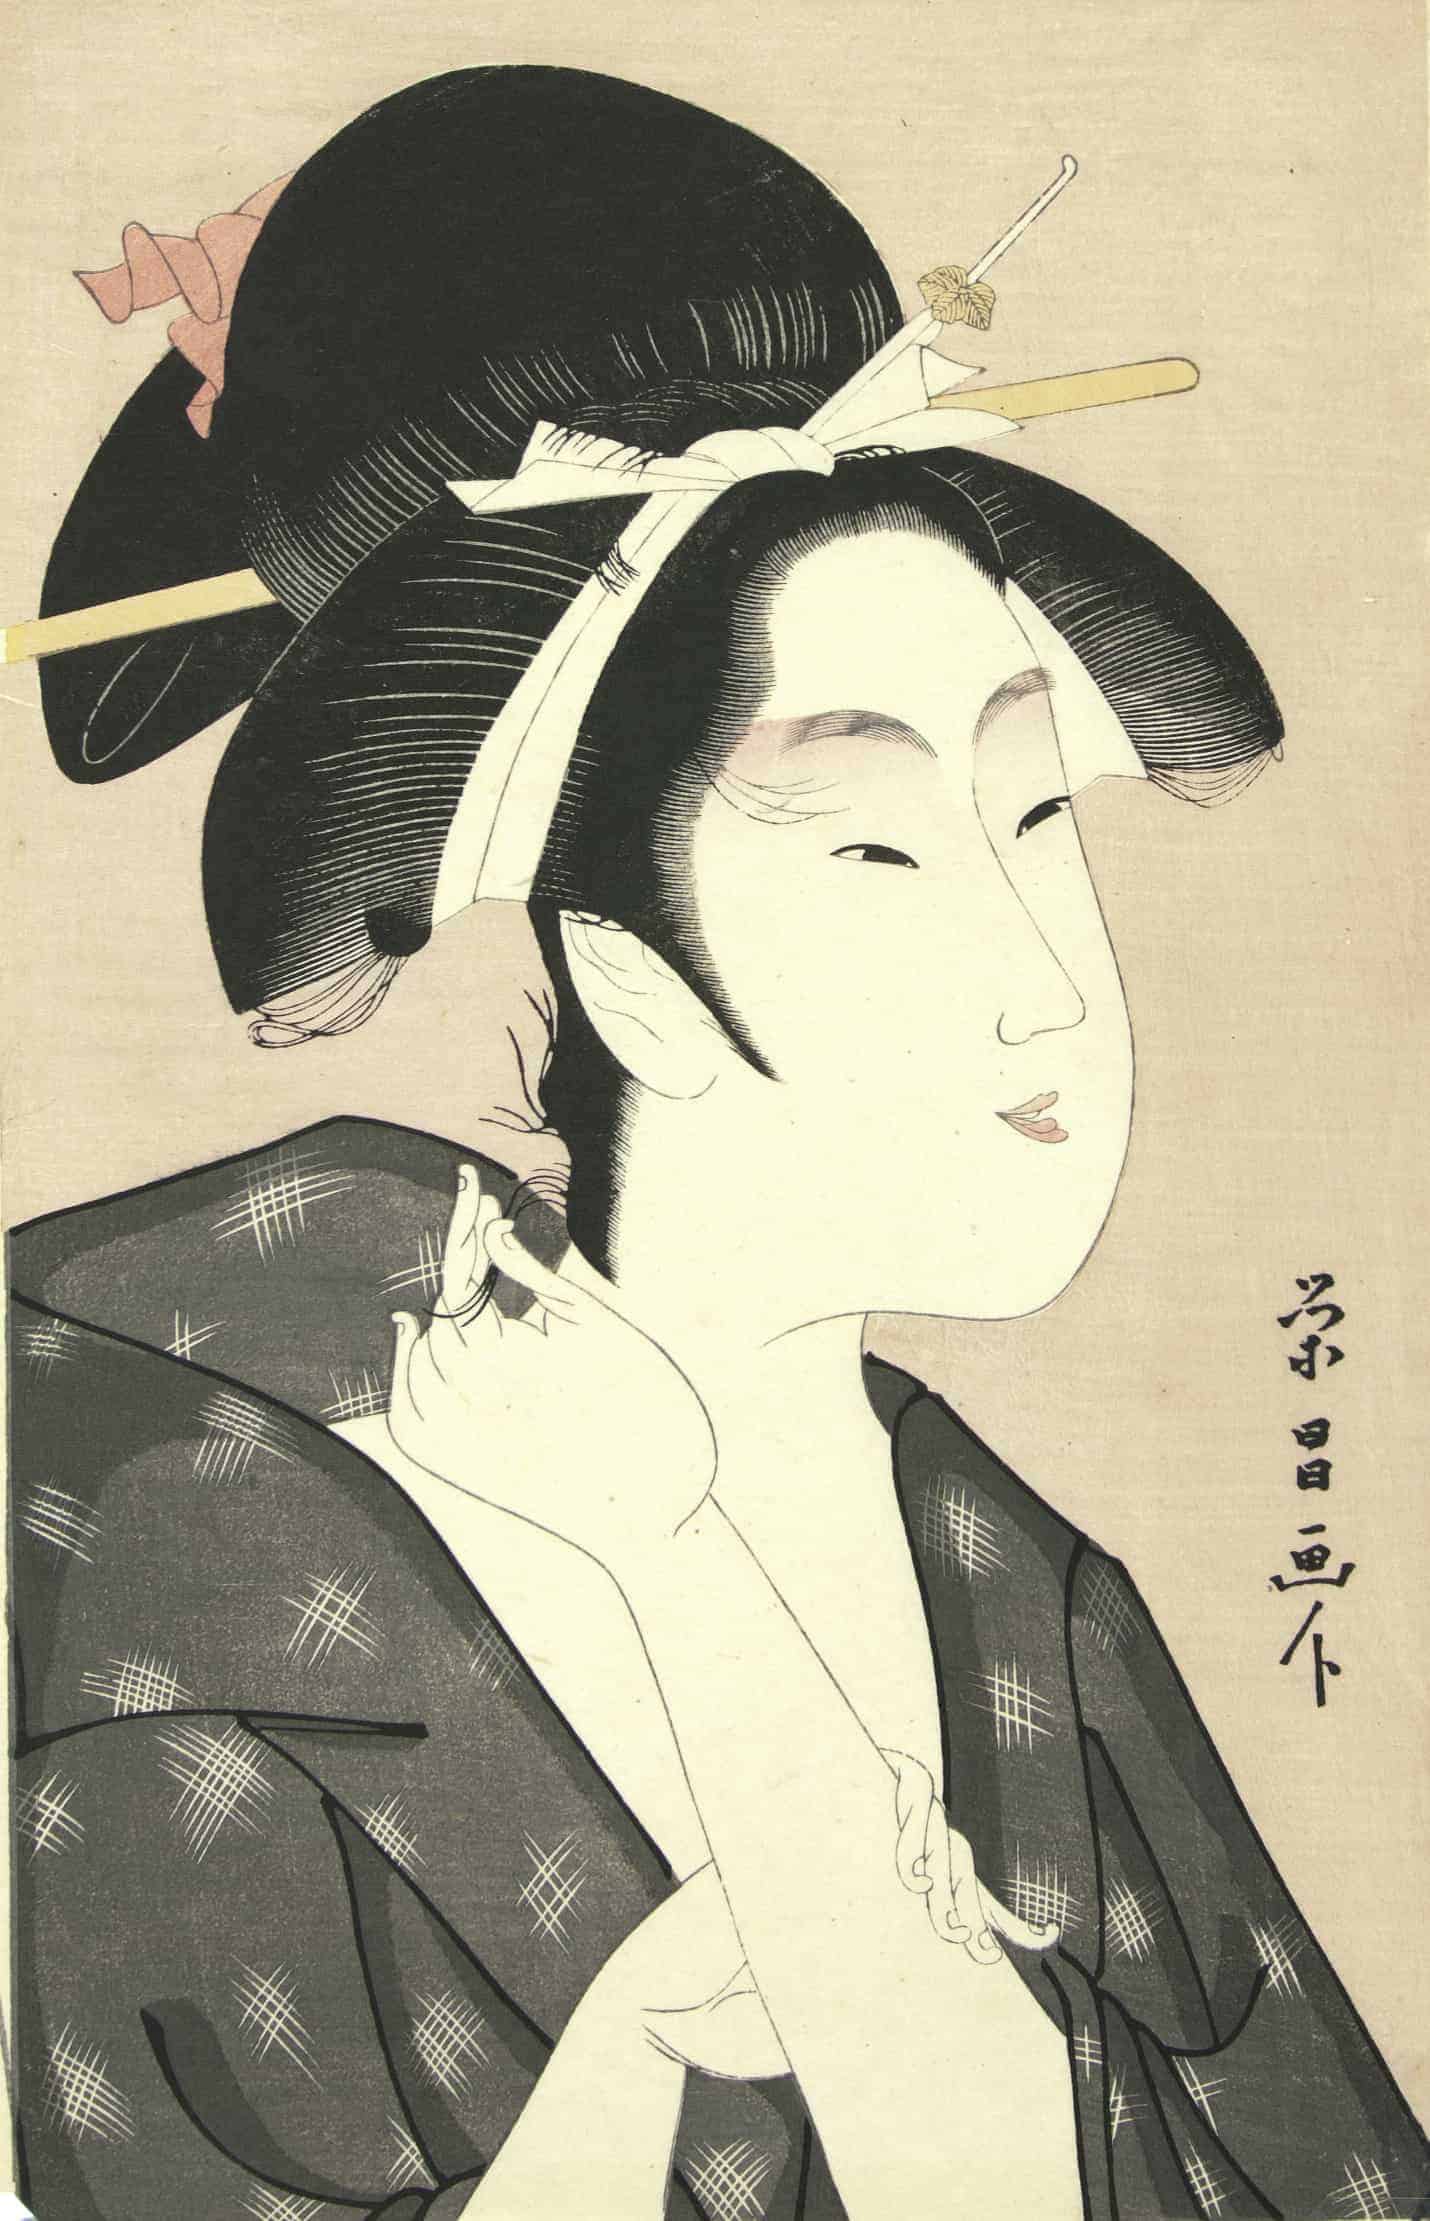 Hosoda Eishô (Chôkôsai), active 1793- 1799 Woman, c. 1800 Color woodcut on laid paper. Courtesy of the Hyde Collection and the University of Syracuse